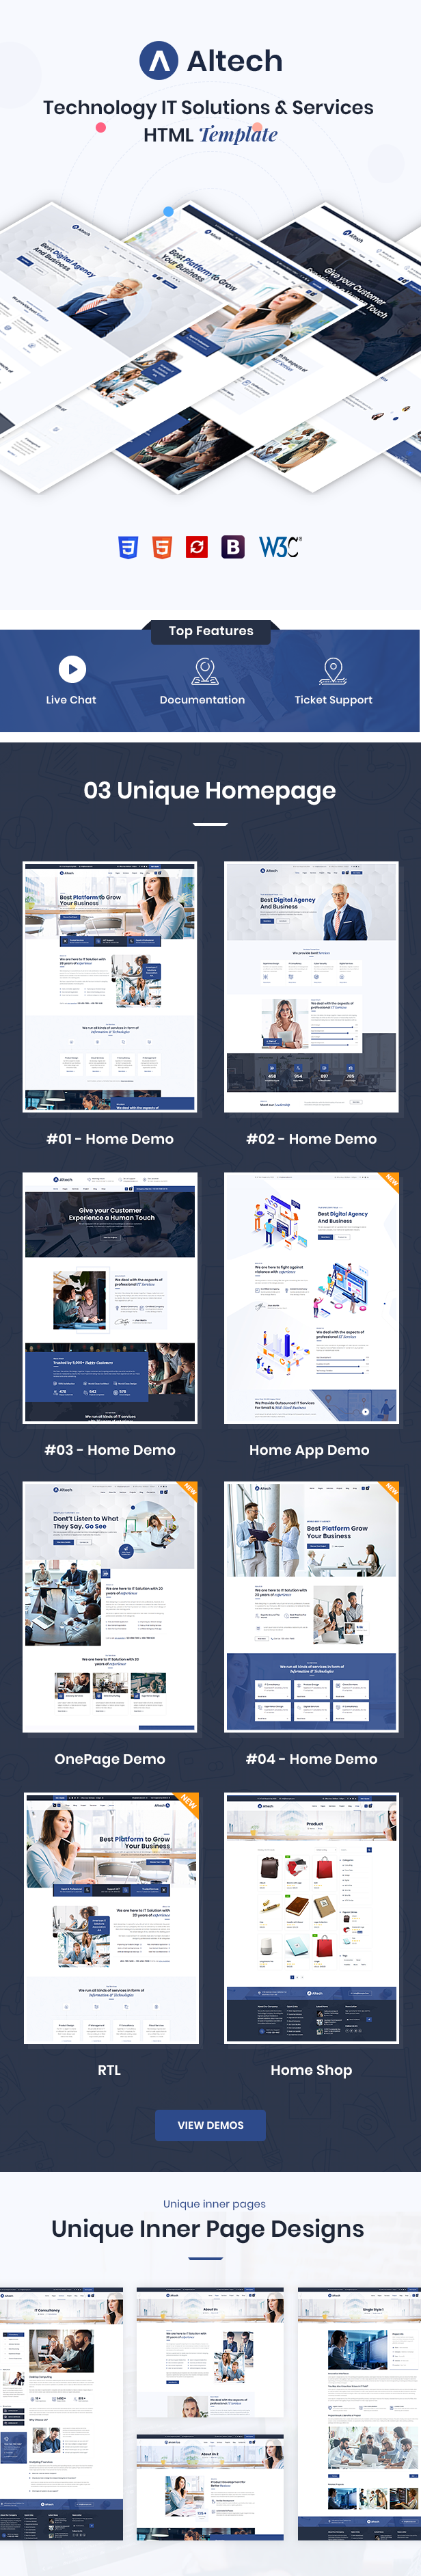 altech intro img001b - Altech | IT Solutions & Multi Services HTML5 Template